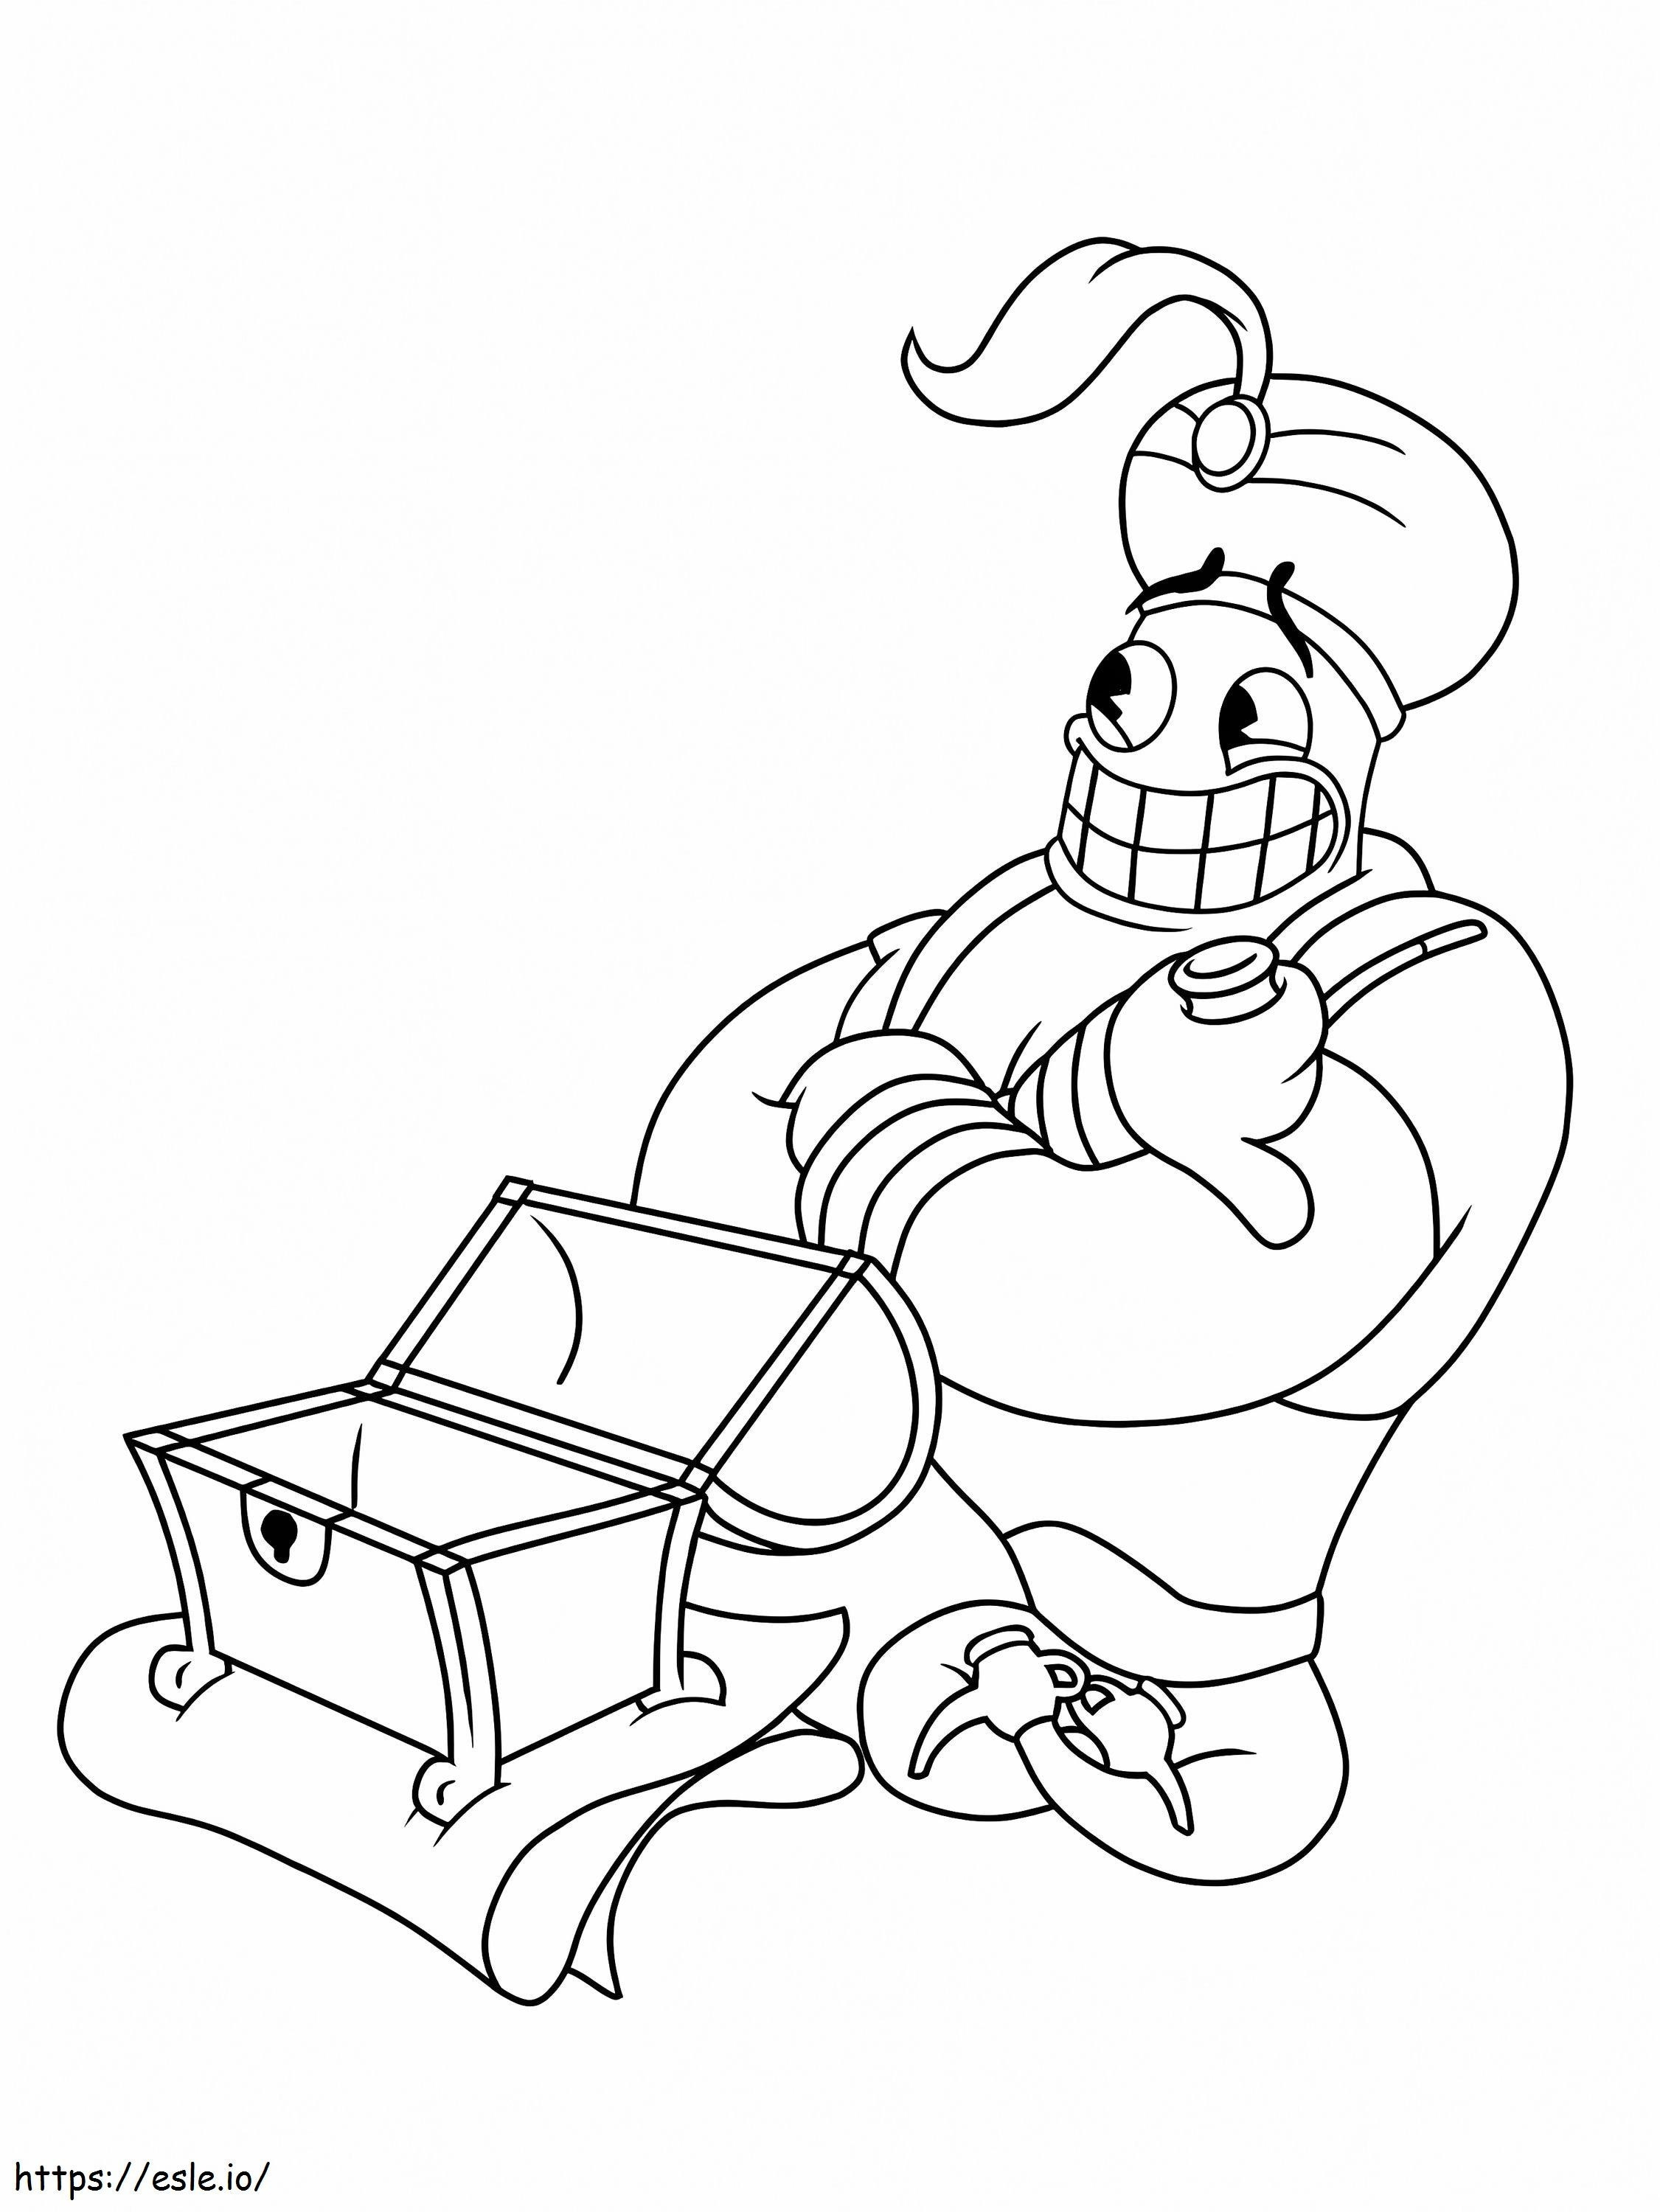 1593566061 Gedfsrg4Wty4Yt coloring page